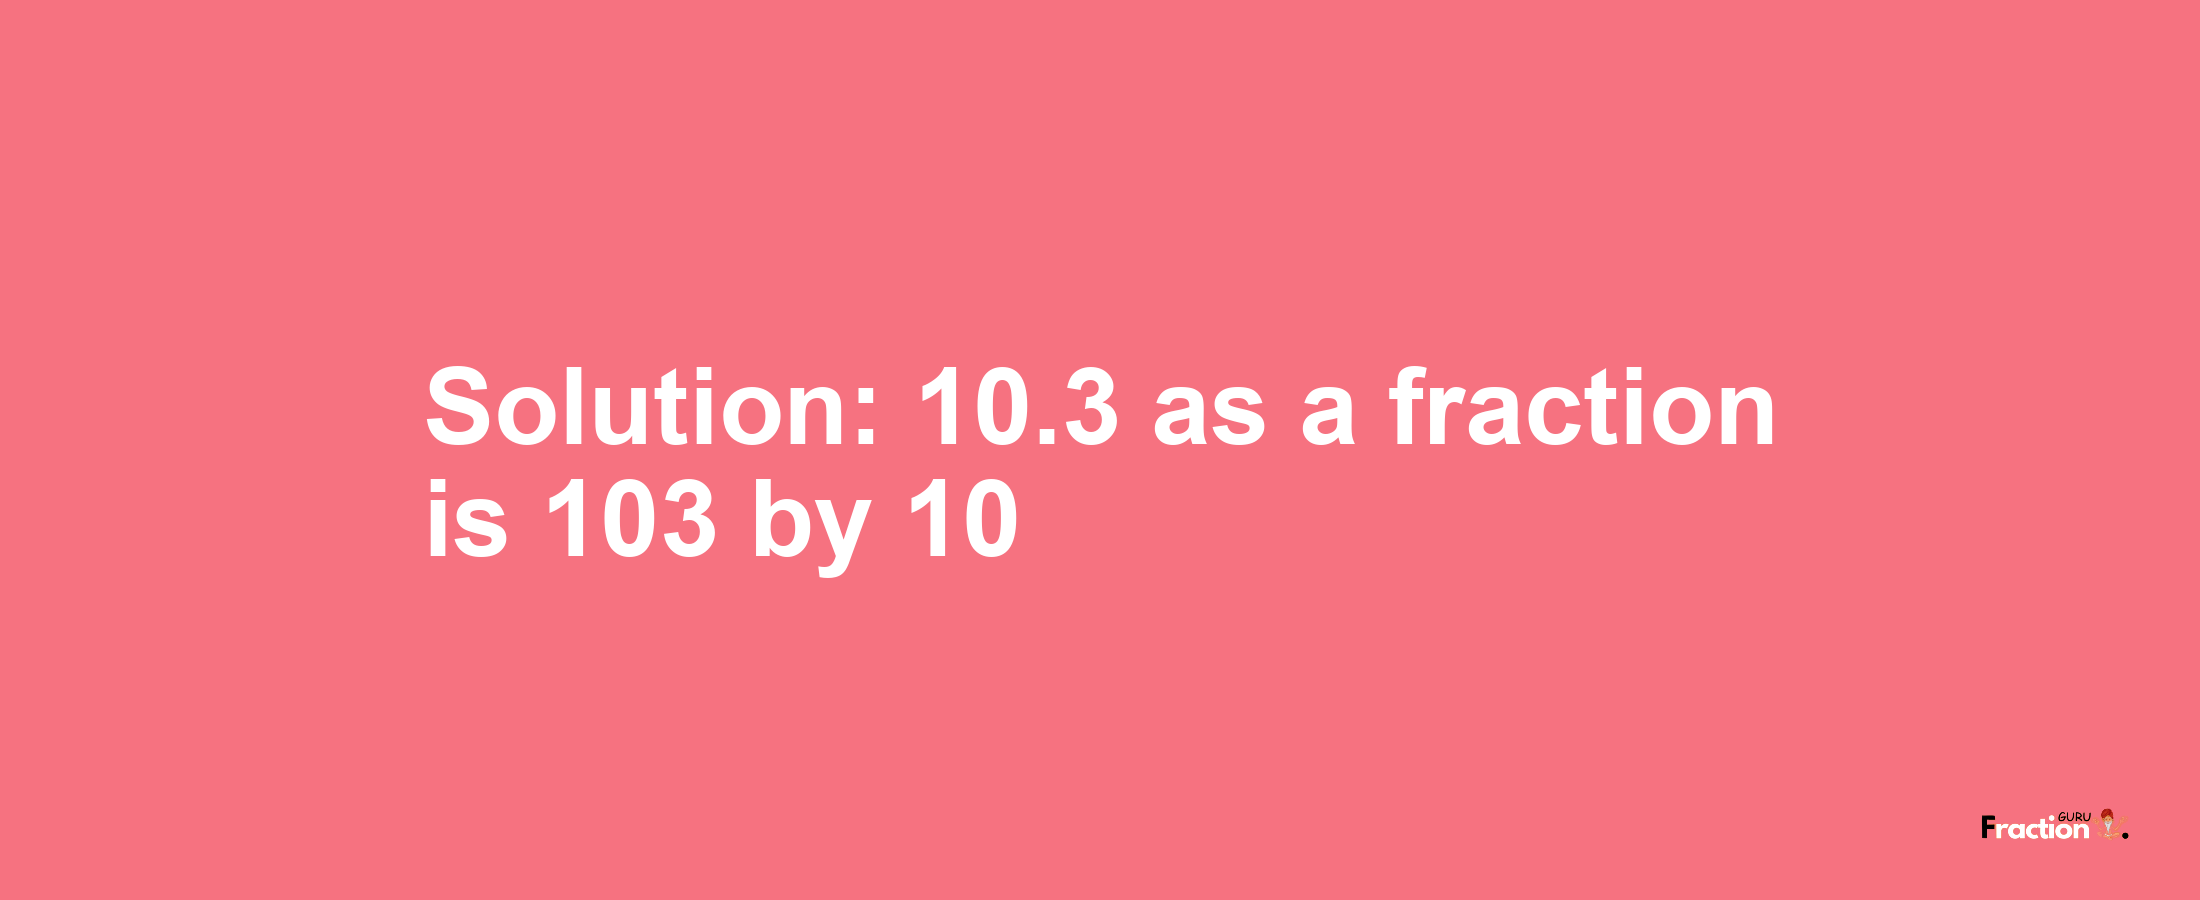 Solution:10.3 as a fraction is 103/10